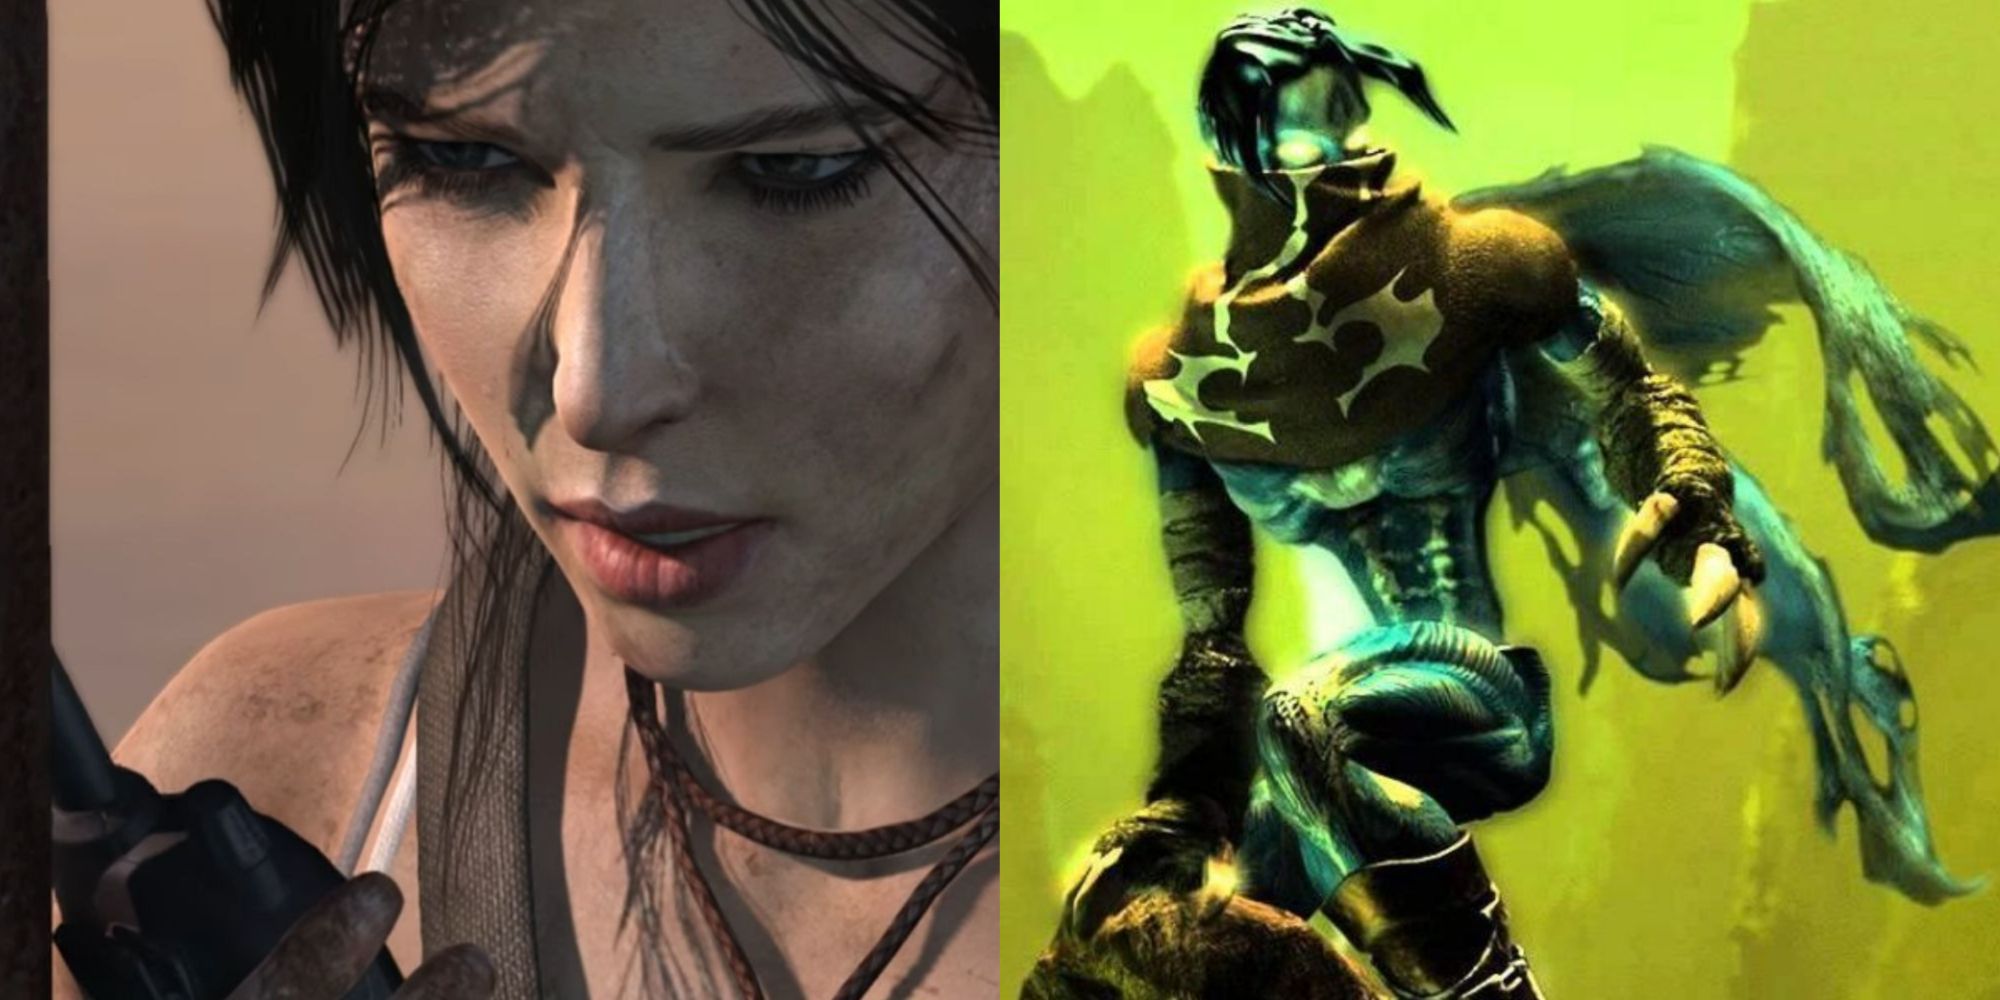 Crystal Dynamics Best Games Featured Split Image Tomb Raider and Soul Reaver